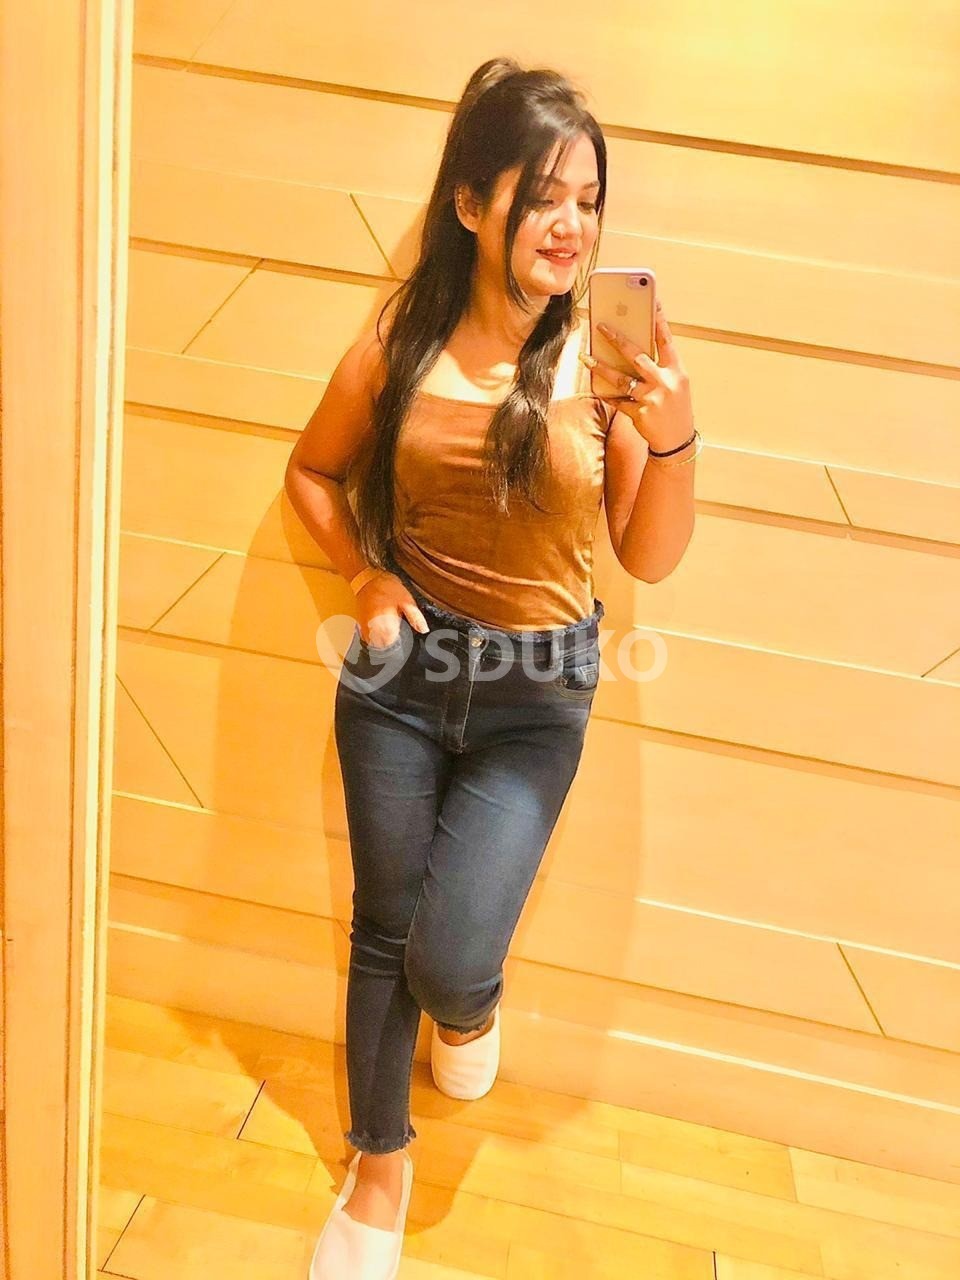 24X7 SERVICE AVAILABLE IN THRISSUR 100% SAFE AND SECURE TODAY LOW PRICE UNLIMITED ENJOY HOT COLLEGE GIRL HOUSEWIFE AUNTI